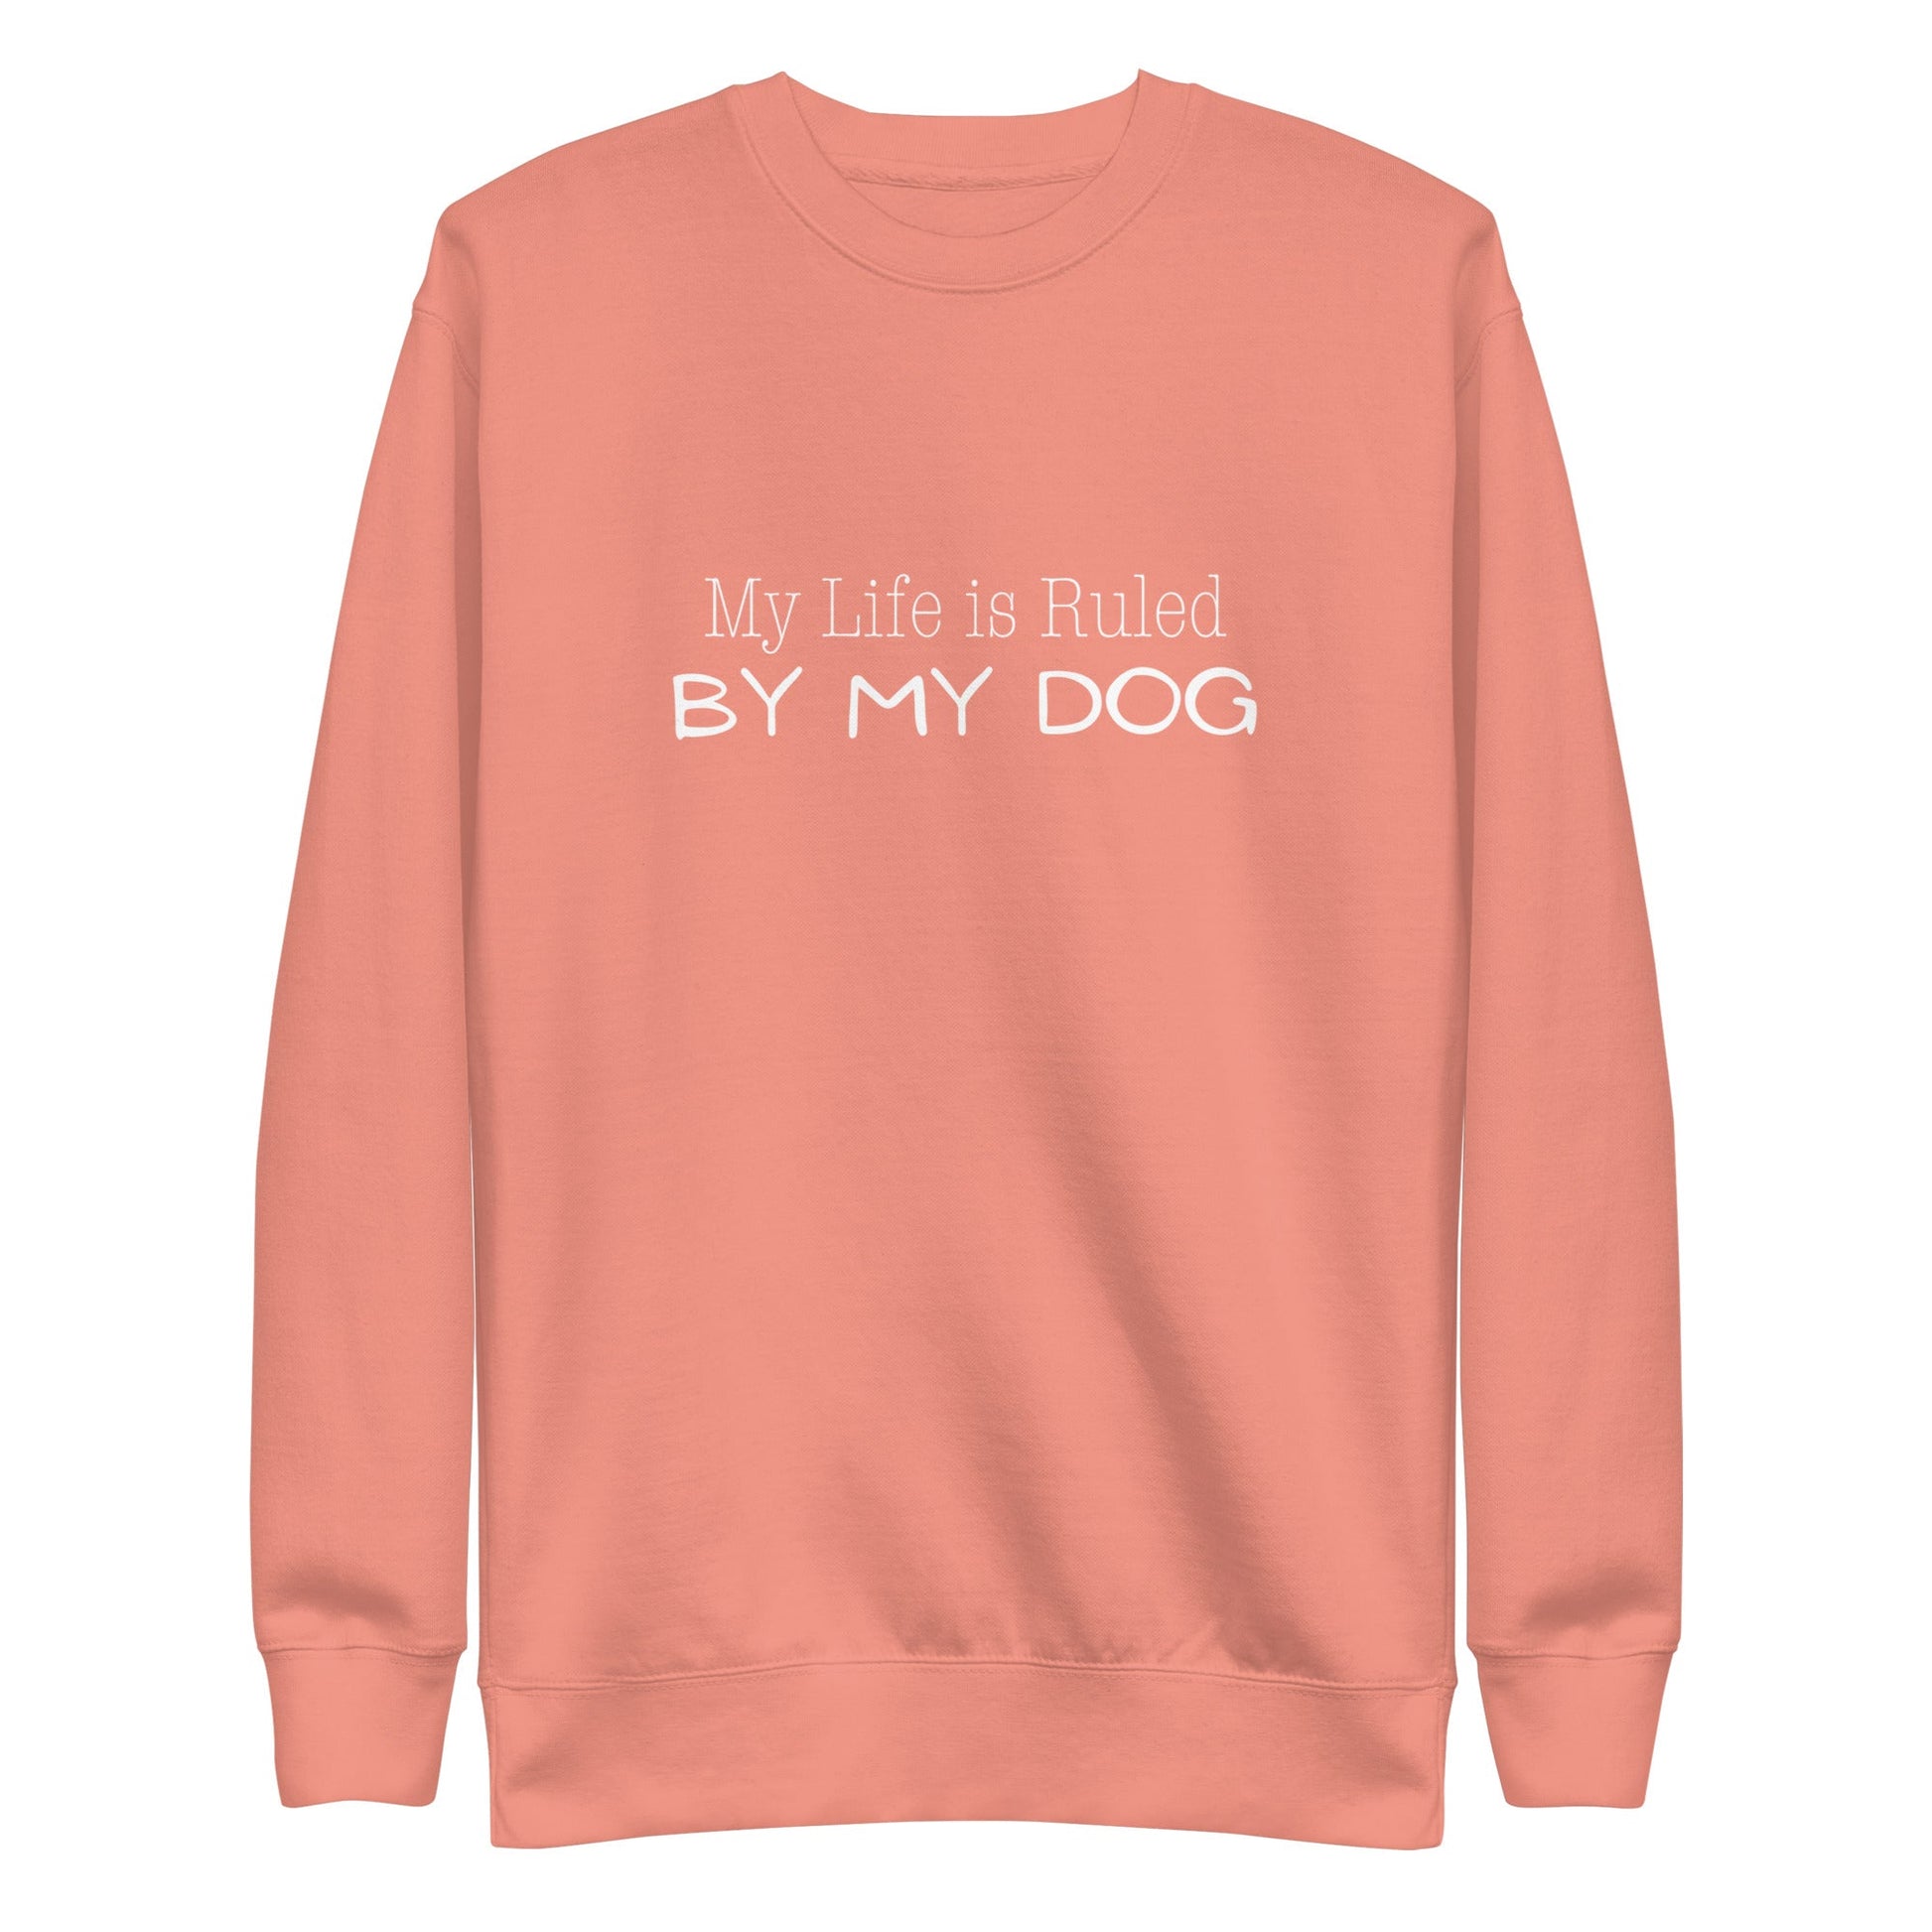 My Life is Ruled by Dog Sweatshirt - Dusty Rose / S